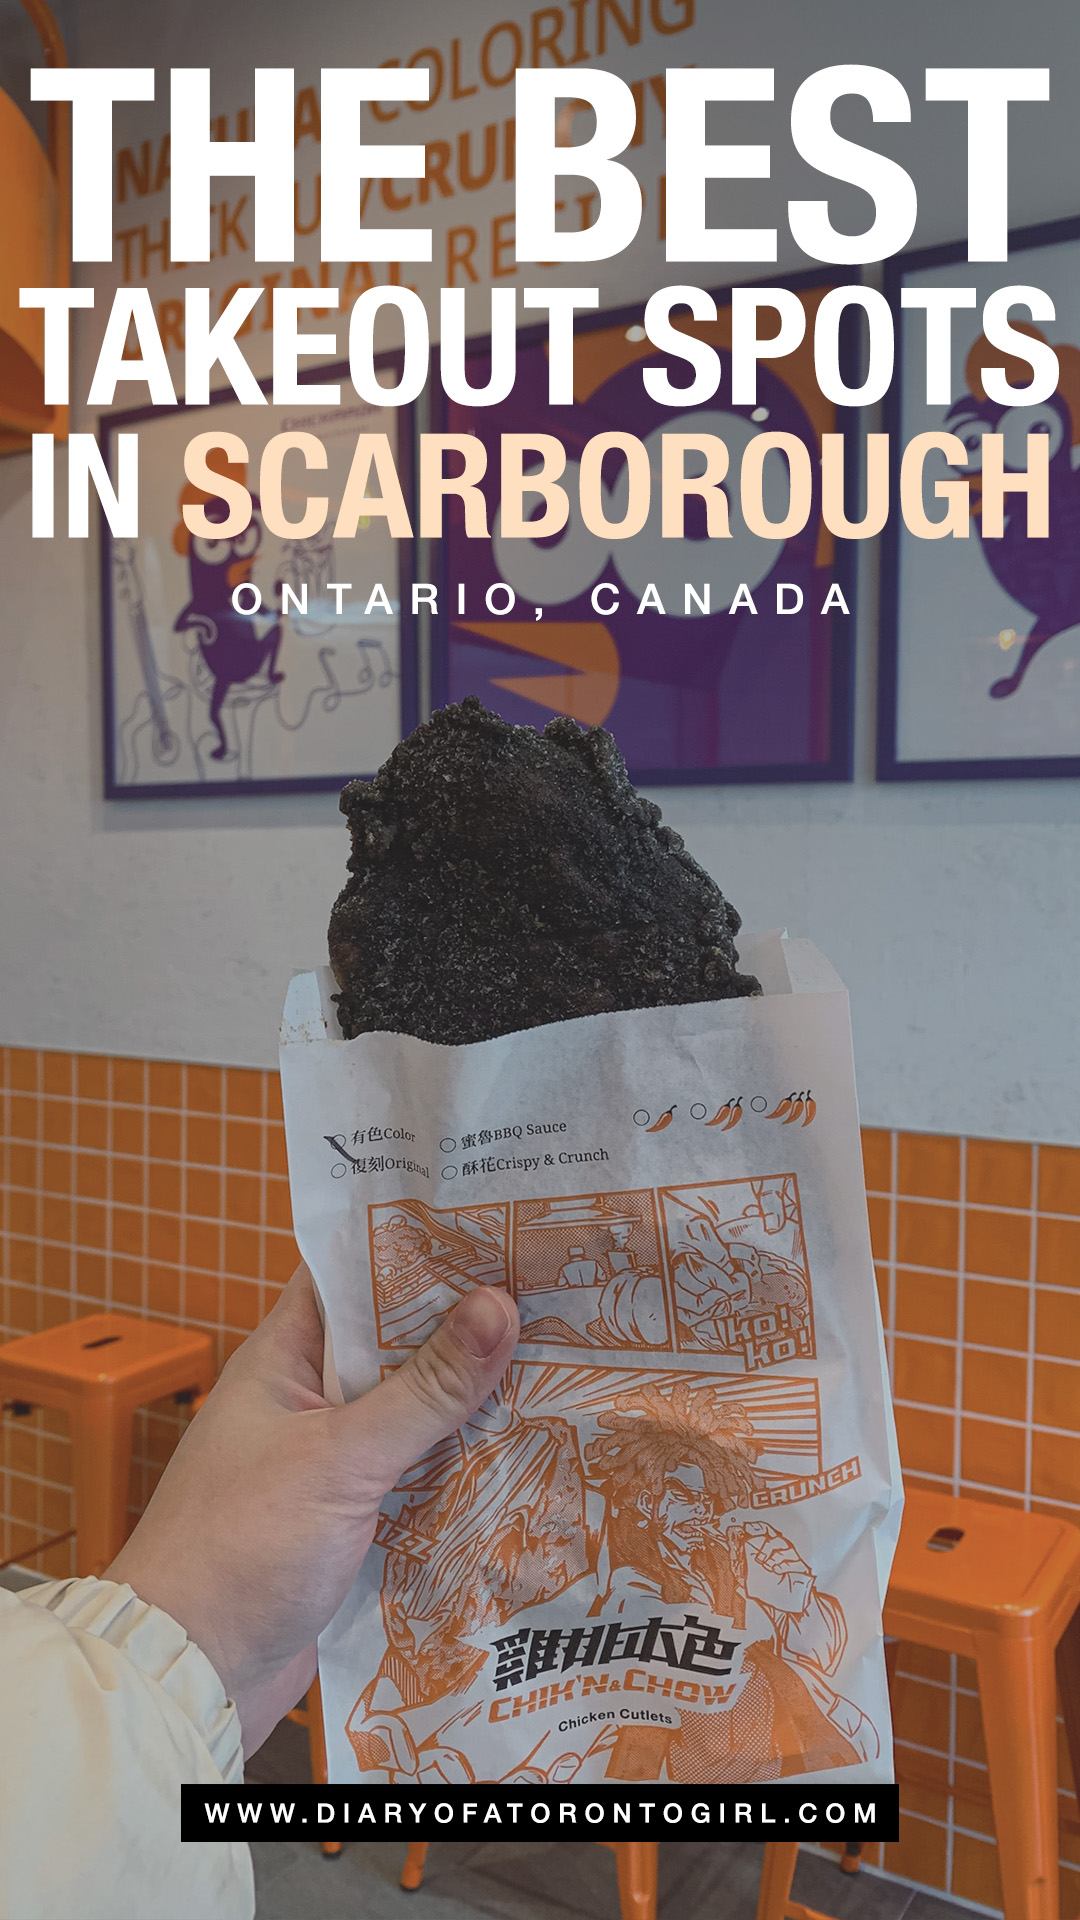 Best takeout spots in Scarborough, Ontario